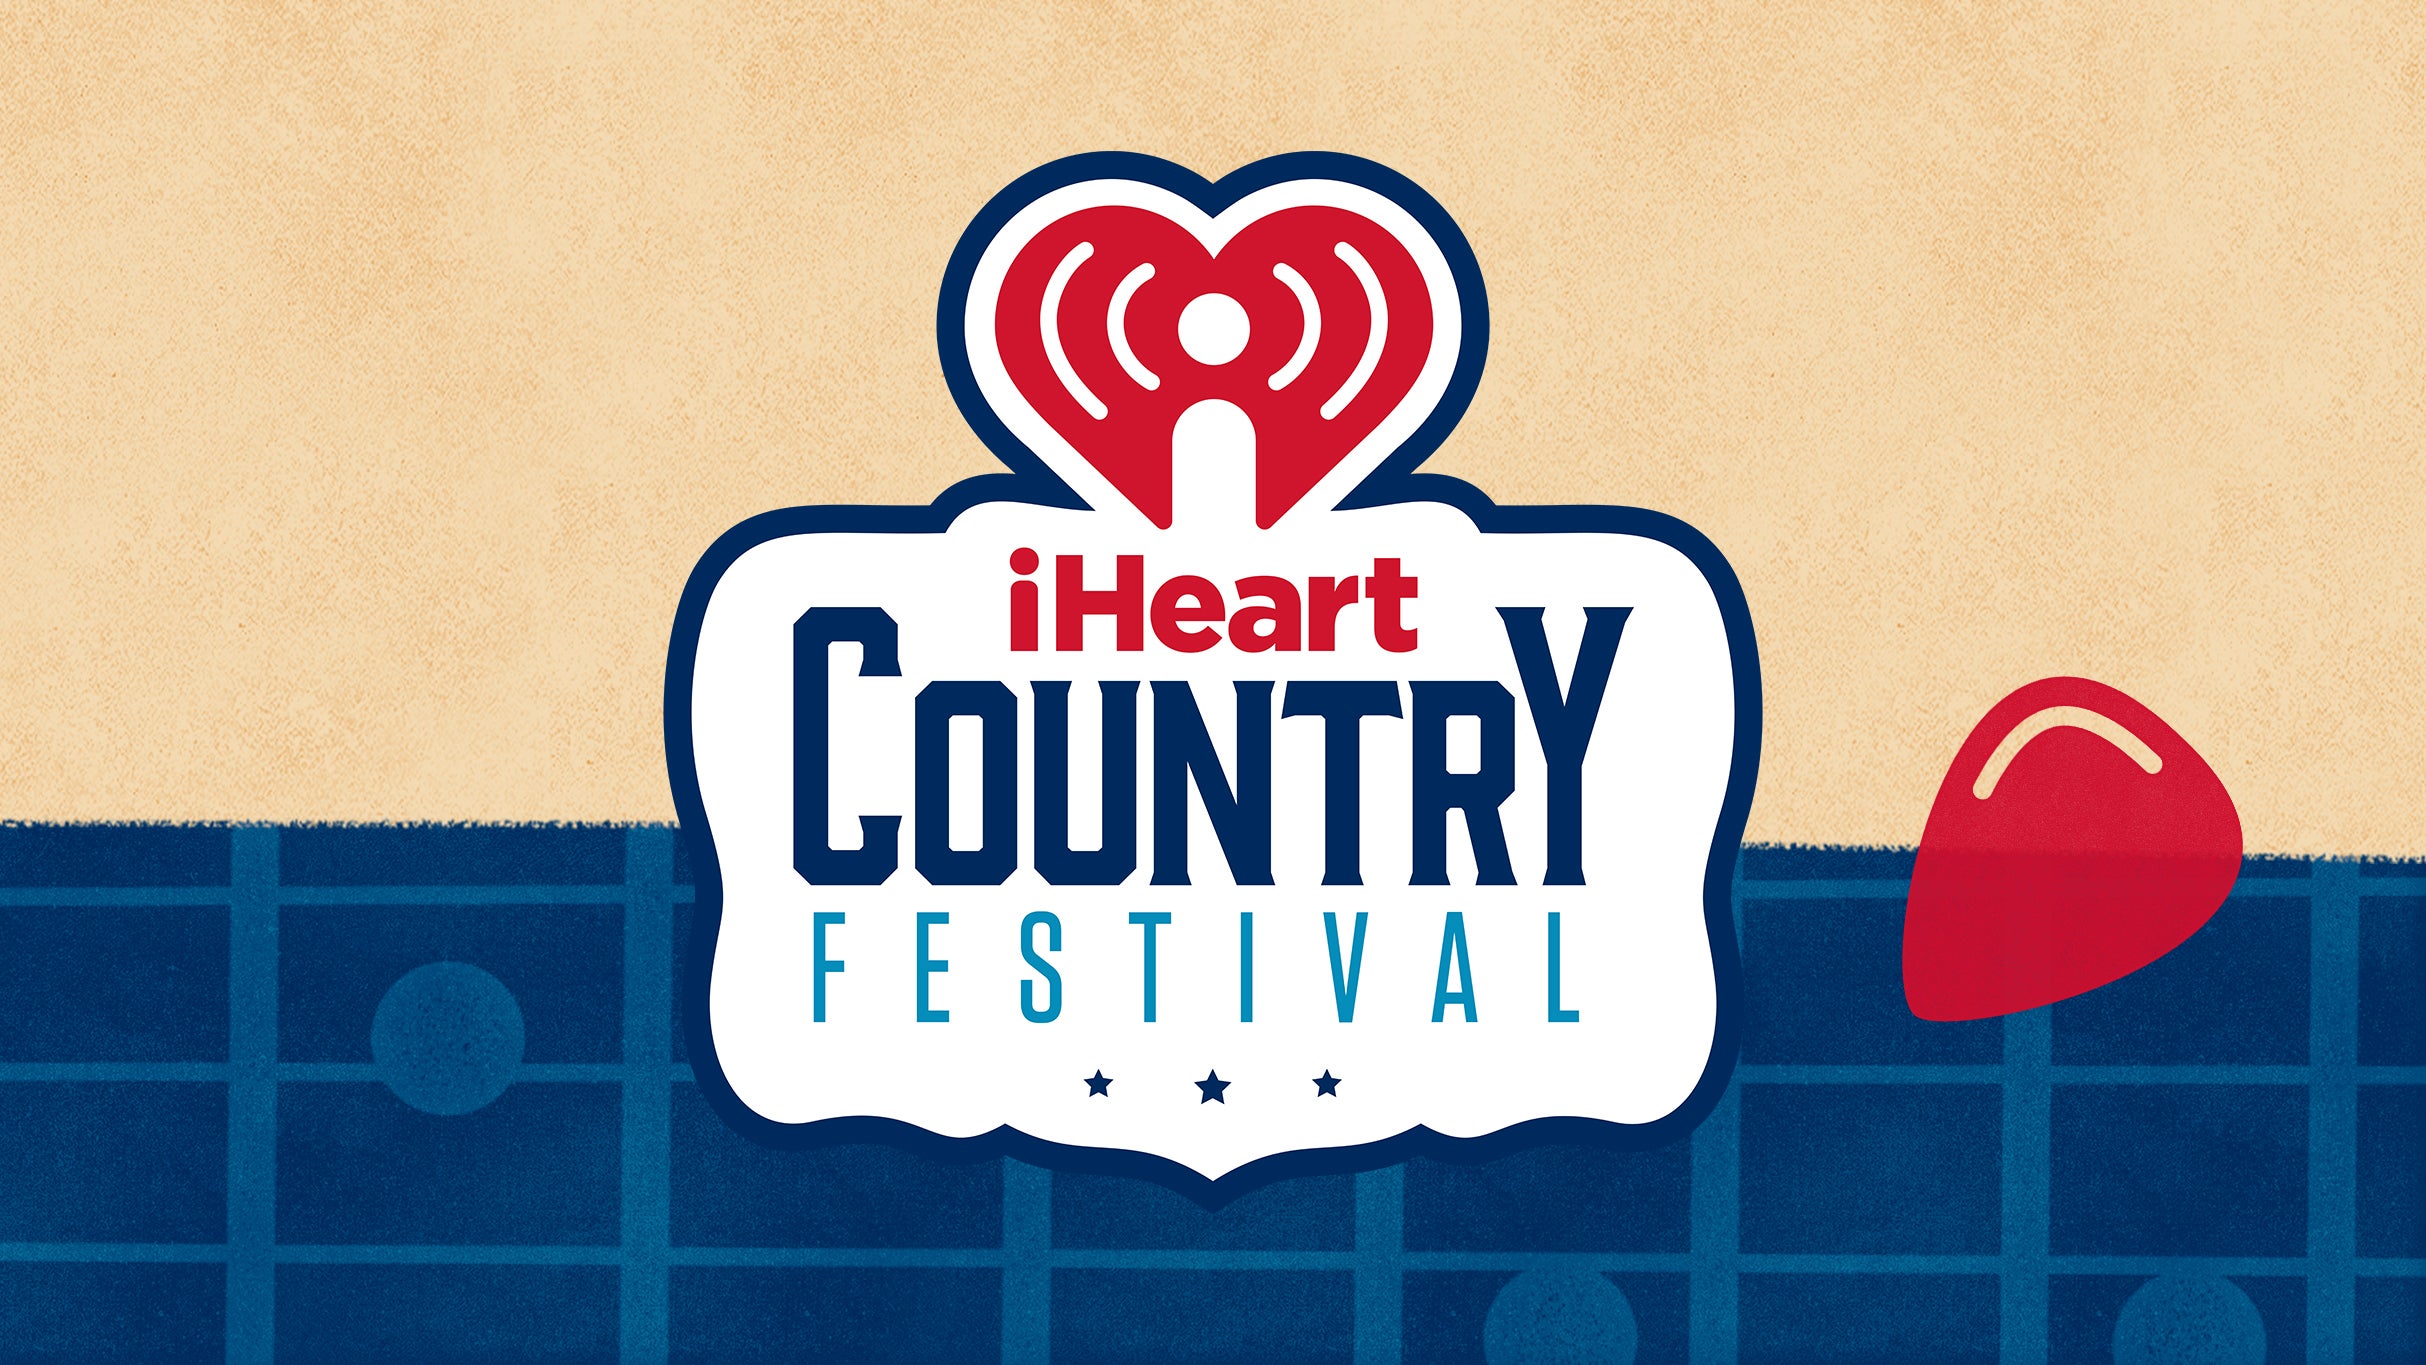 new presale password for iHeartCountry Festival Presented by Capital One affordable tickets in Austin at Moody Center ATX